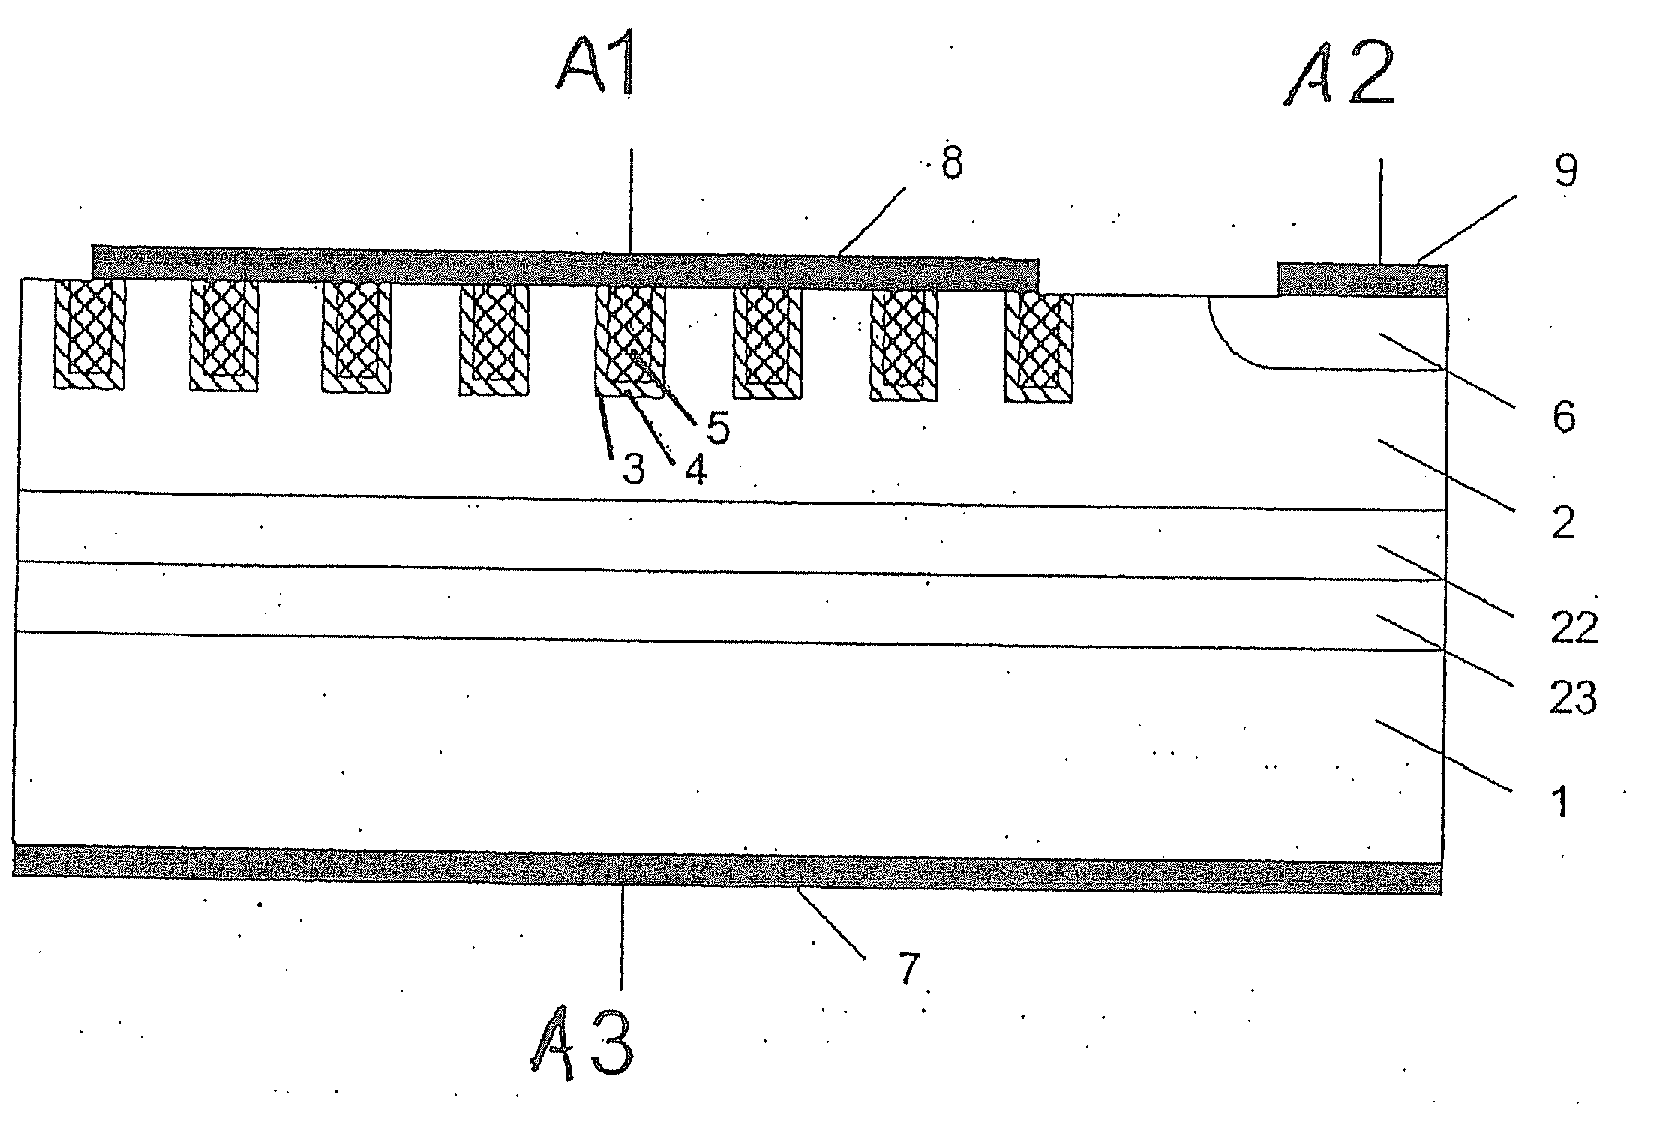 Protective element for electronic circuits